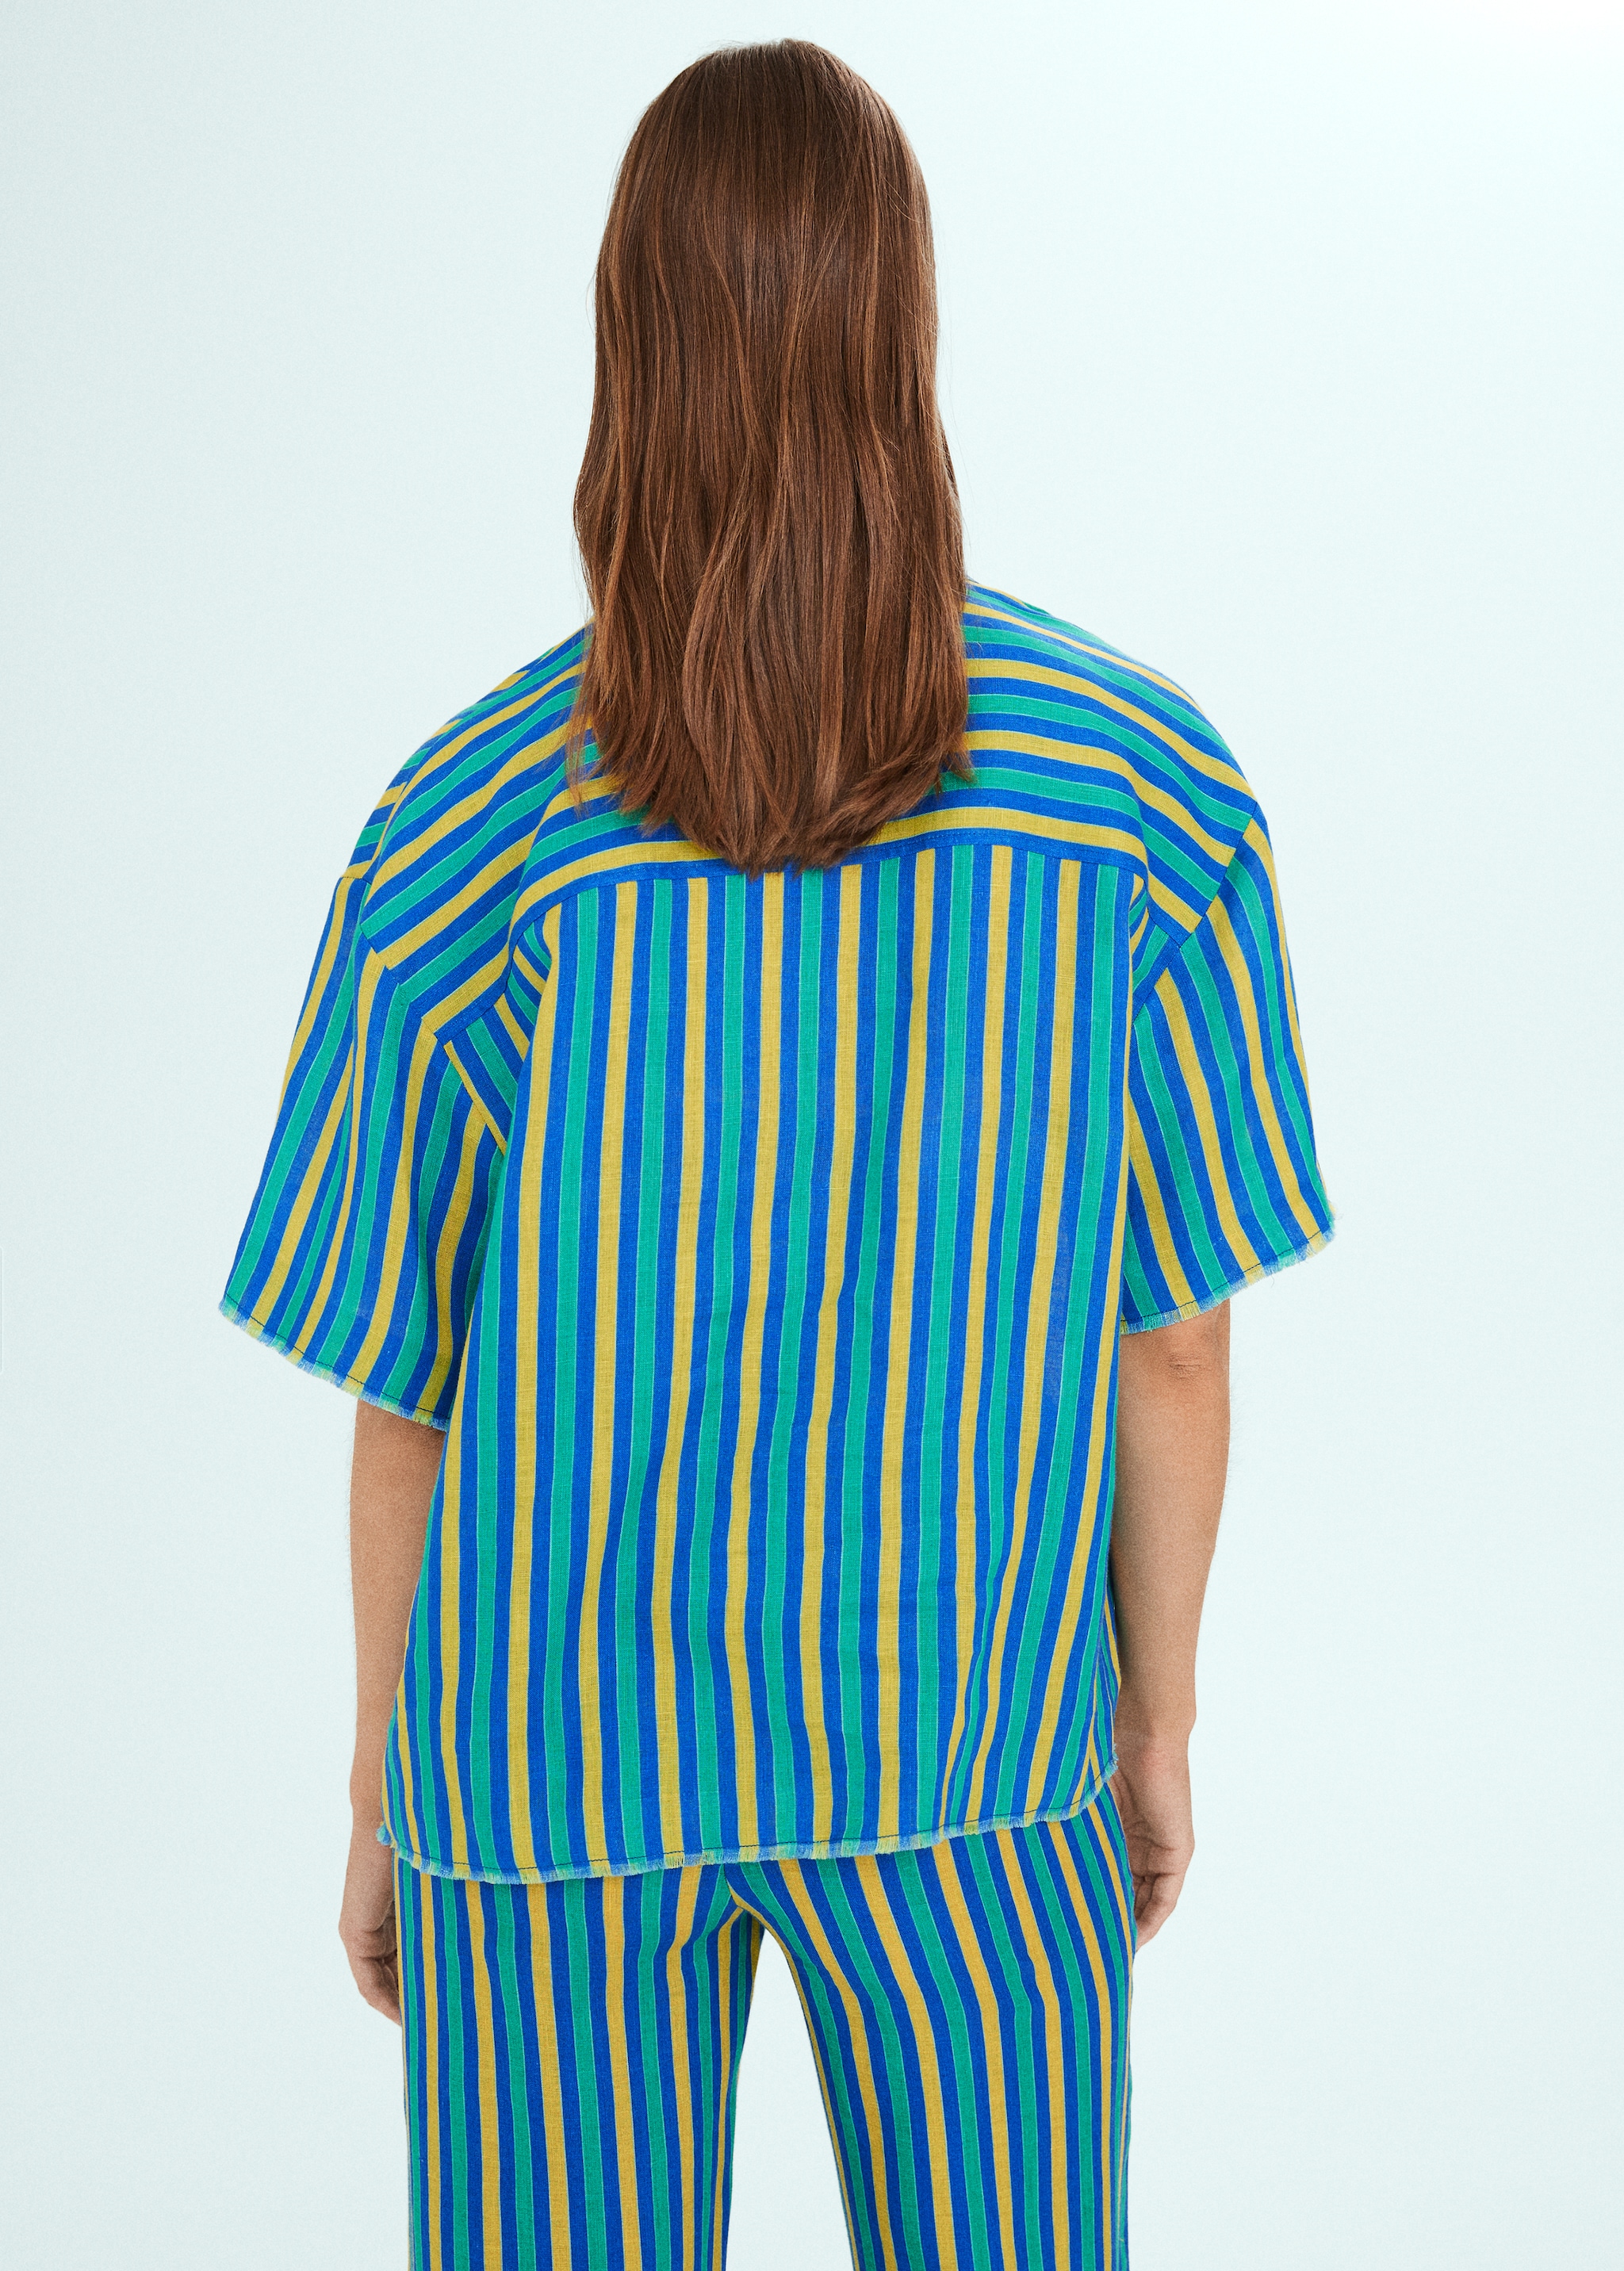 Multi-coloured striped linen shirt - Reverse of the article